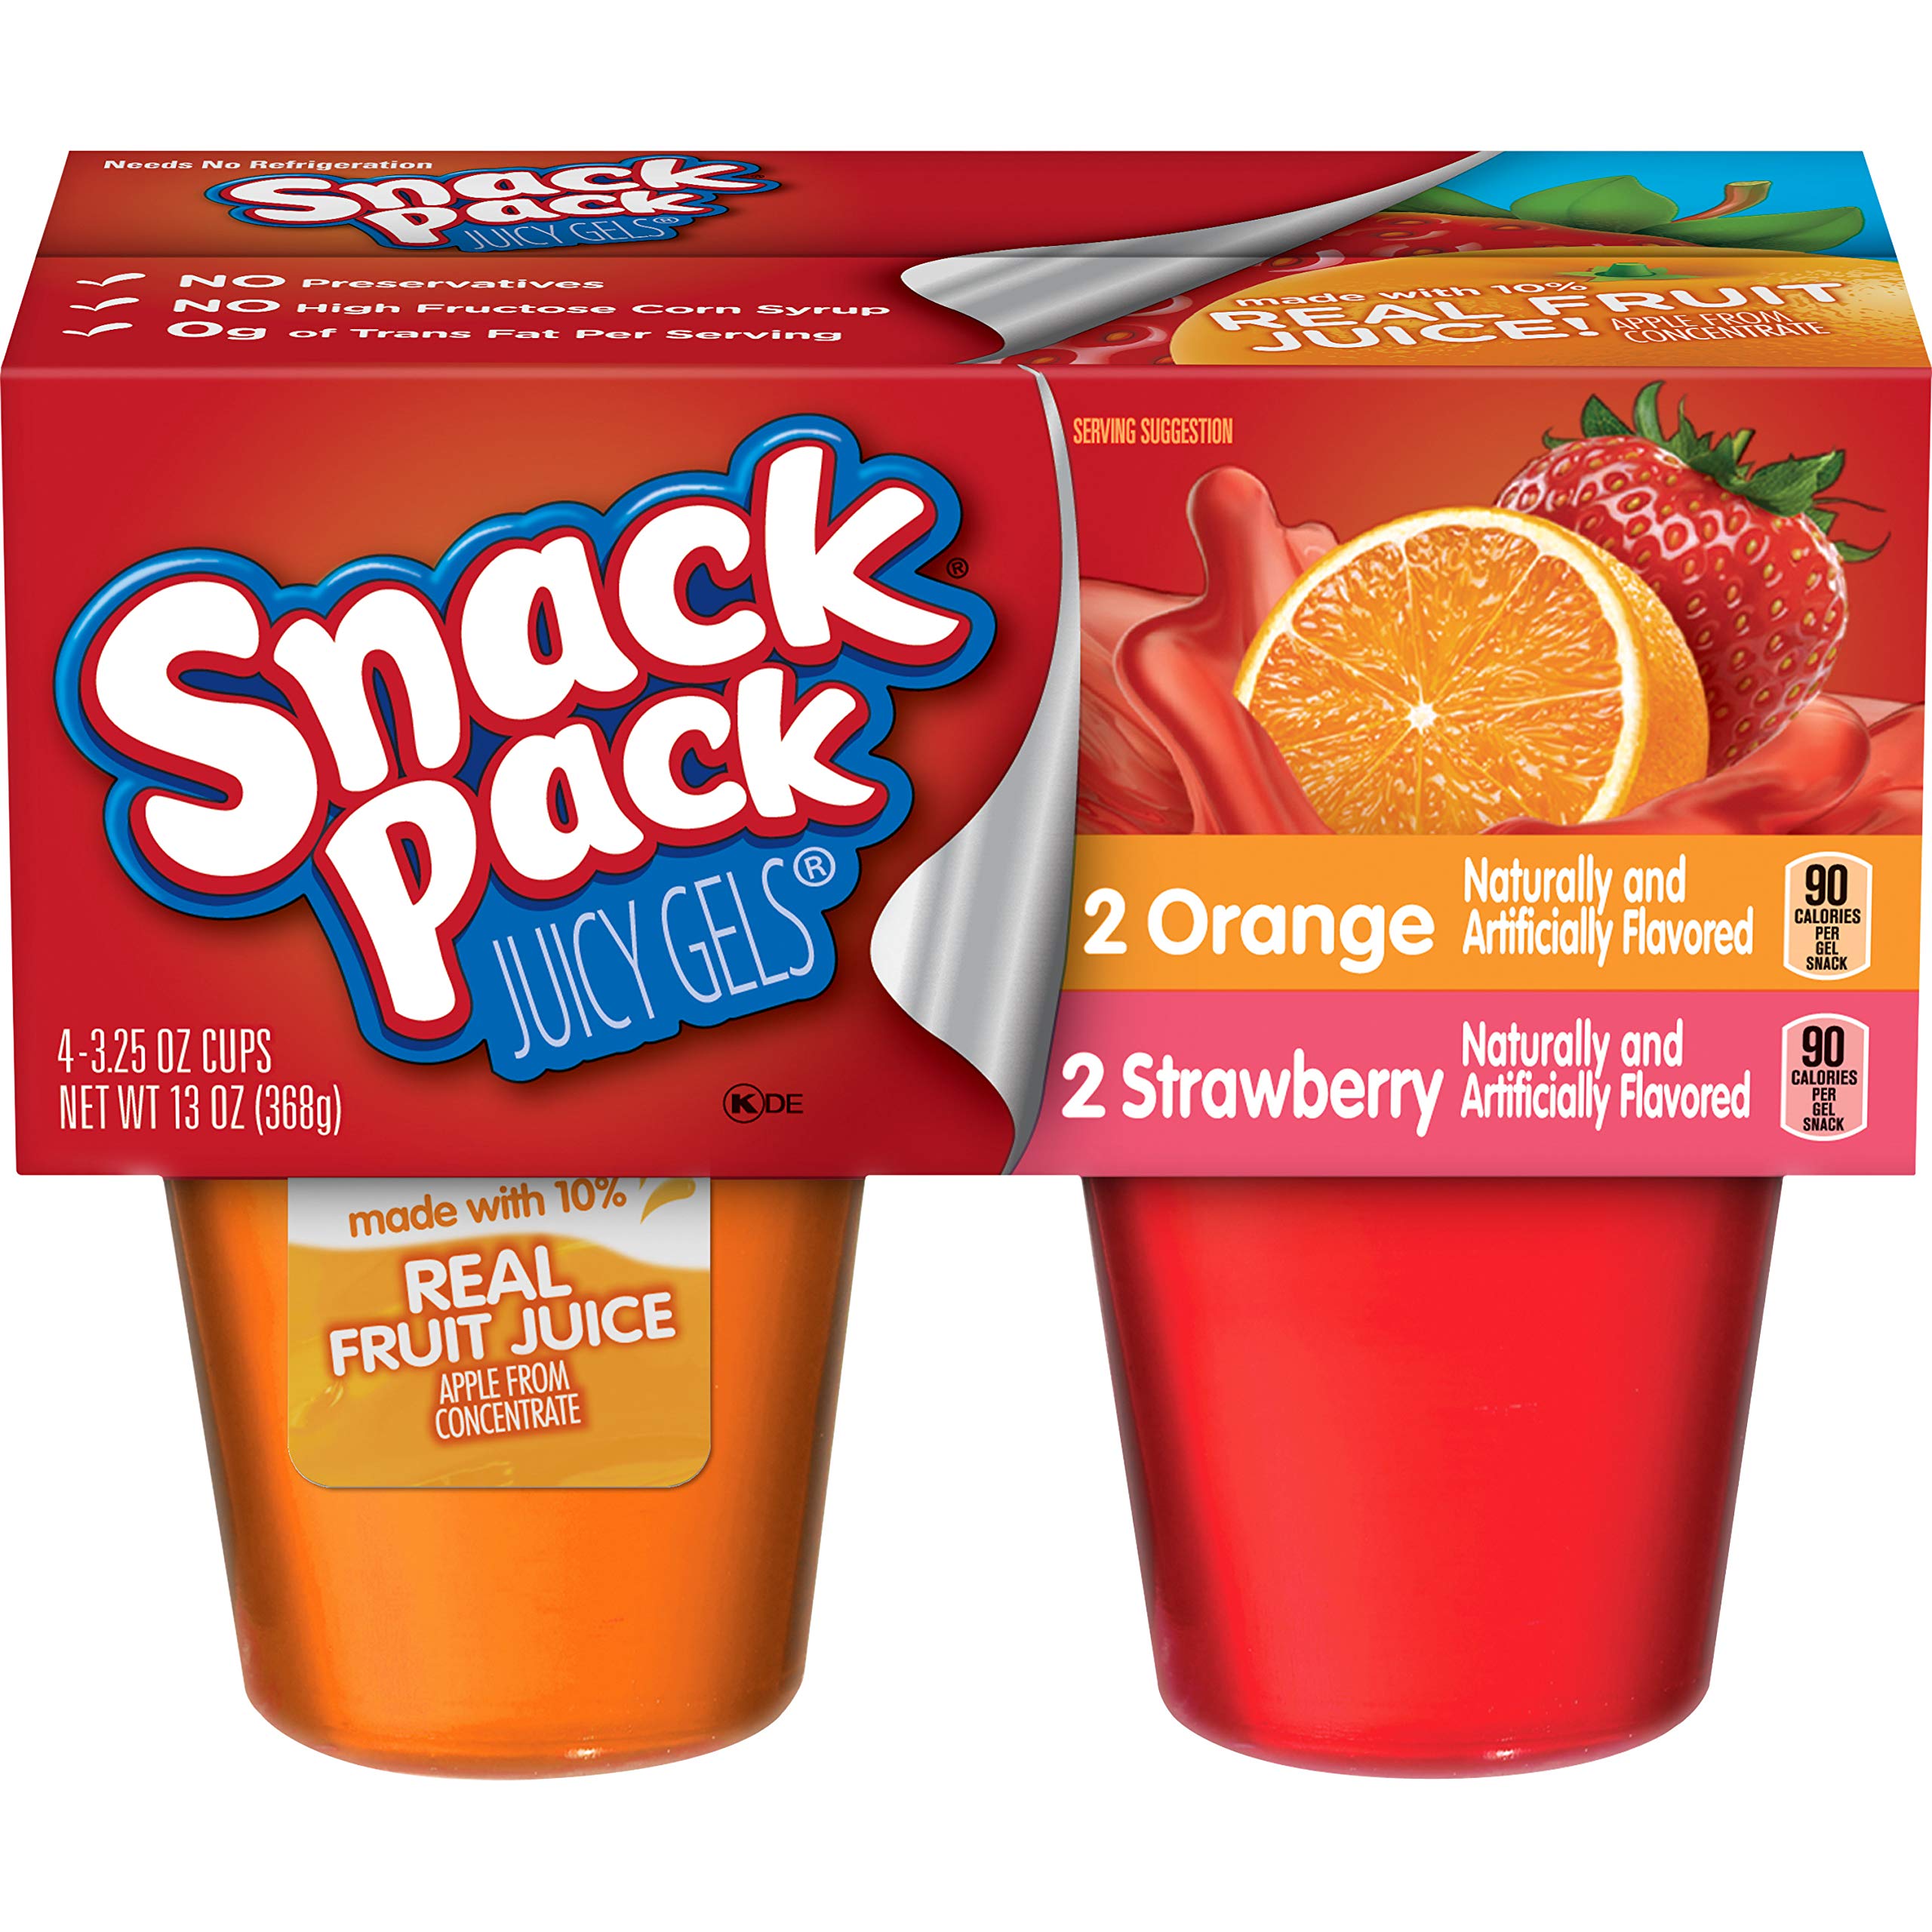 4-Cups 3.25-Oz each Snack Pack Juicy Gels (Various) $0.95 w/ S&S + Free Shipping w/ Prime or on $35+